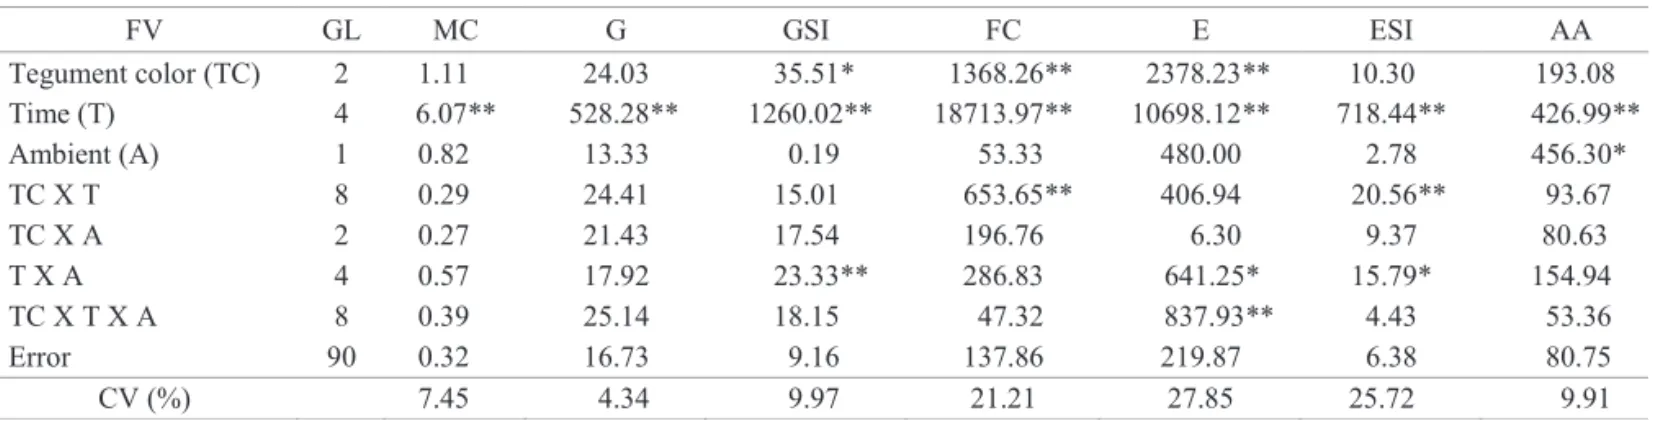 Table 1.  Analysis of variance observed seed moisture content (MC), germination (G), germination speed index (GSI), first  count (FC), emergence (e), emergence speed index (eSI) and accelerated ageing (AA) on seed of oil radish with  diferent tegument colo